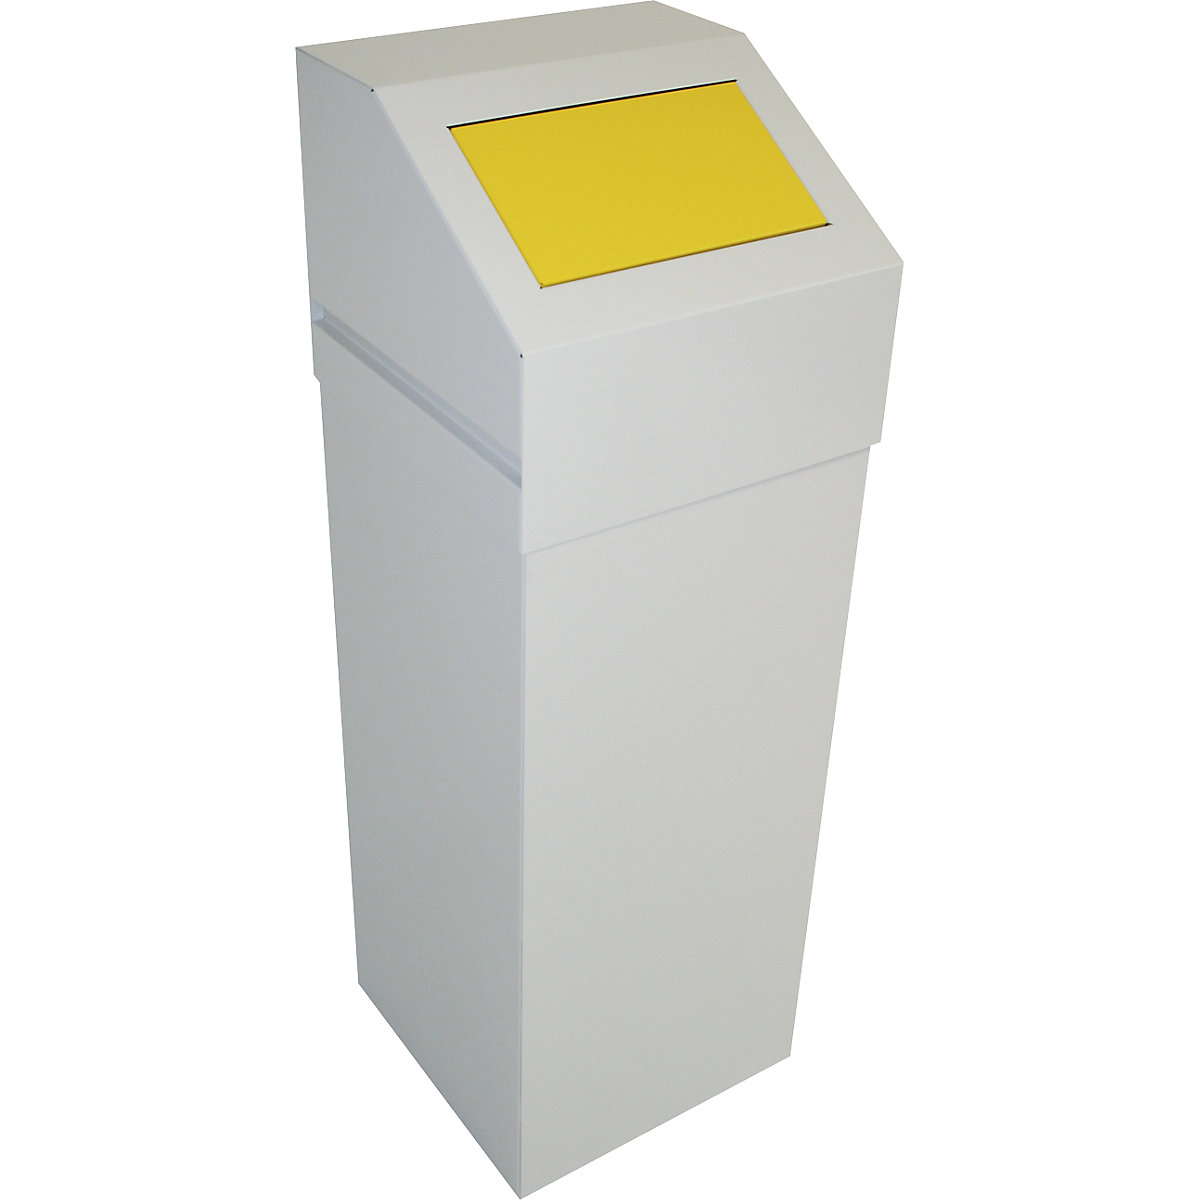 Waste separation system, capacity 65 l, with yellow lid